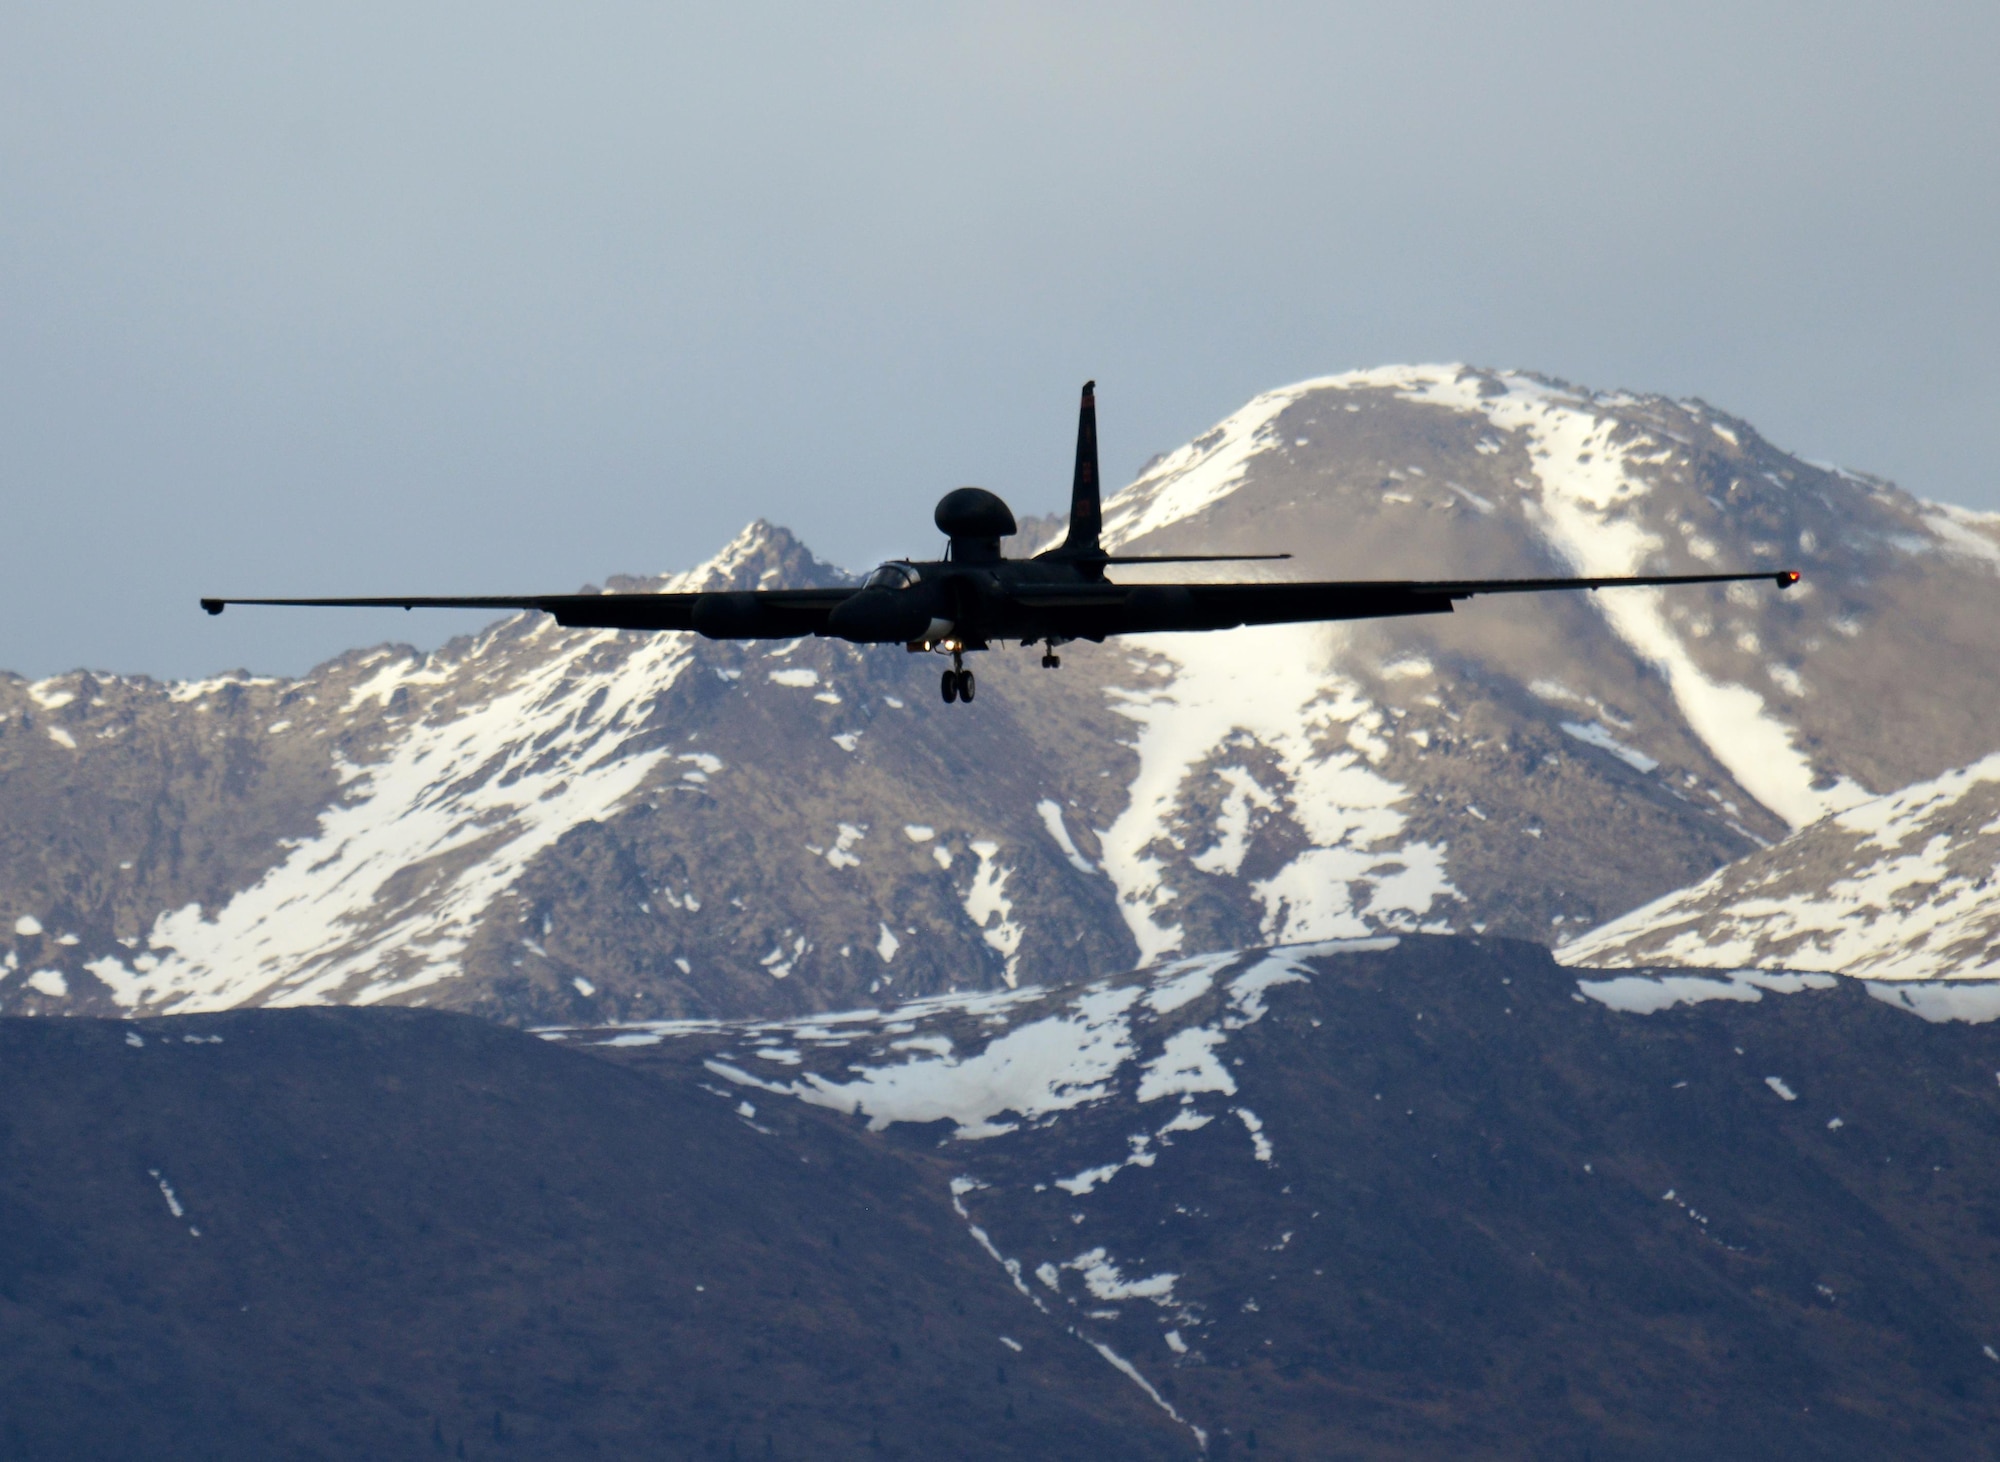 A U-2 Dragon Lady prepares to land during exercise Northern Edge 17 at Joint Base Elmendorf-Richardson, Alaska, May 8, 2017. The U-2 participated for the first time in Northern Edge, which is a biennial joint training exercise involving approximately 6,000 personnel and 200 fixed-wing aircraft, and dates back to 1975. (U.S. Air Force photo by Staff Sgt. Jeffrey Schultze)